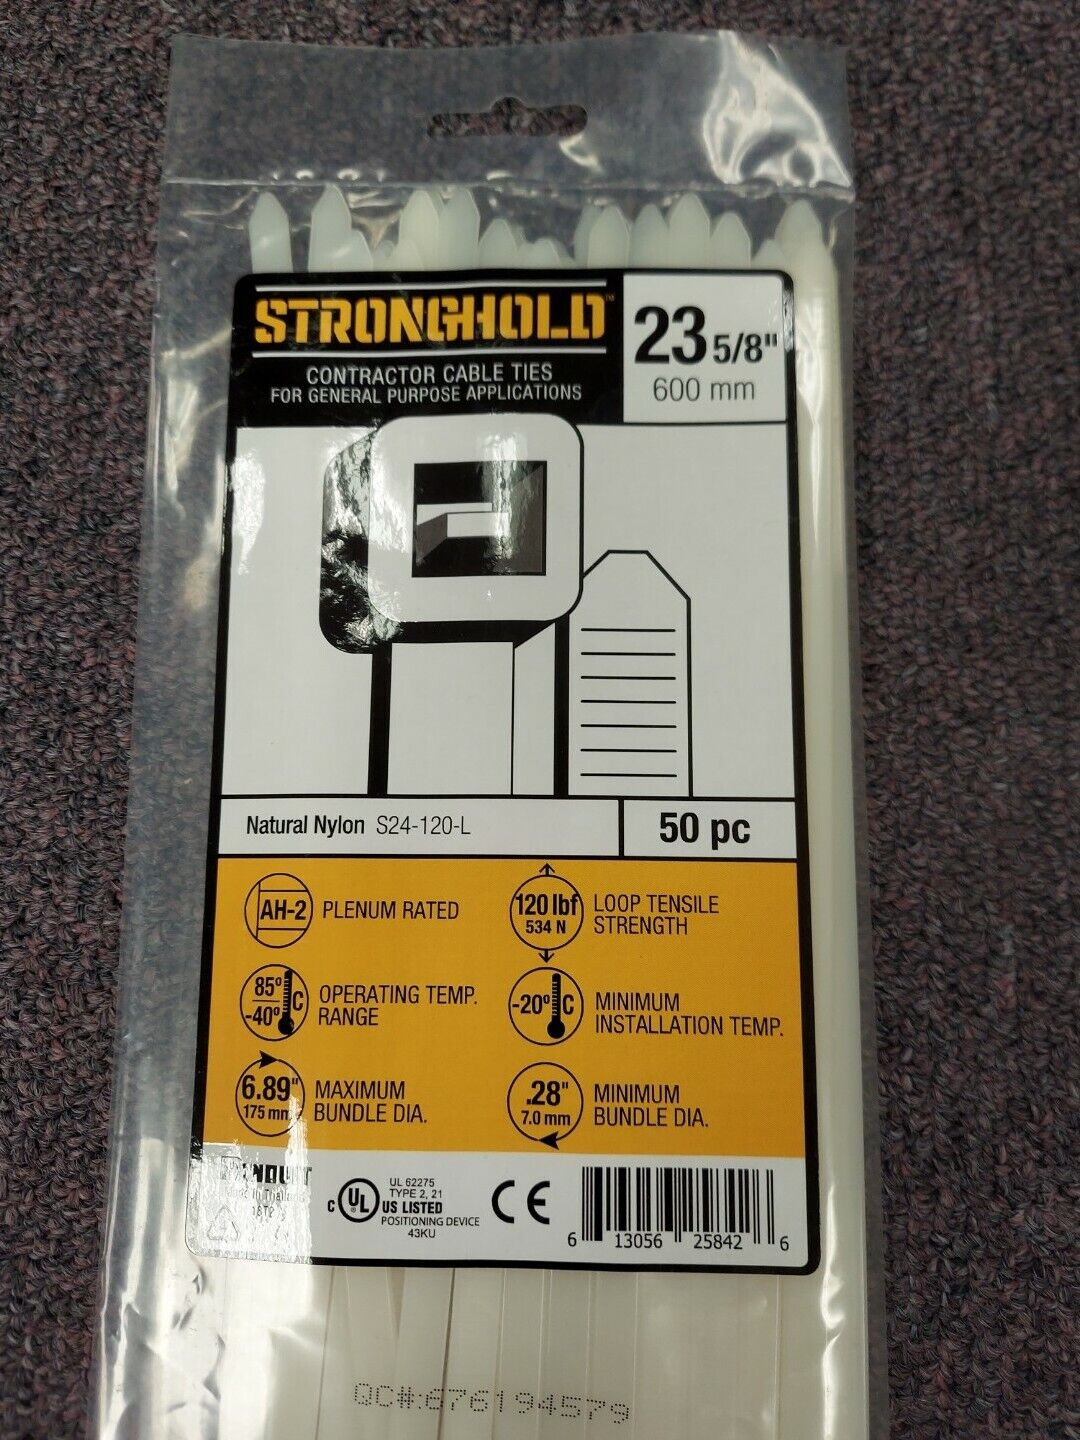 Panduit Stronghold Contractor Cable Ties 23 5/8  50 pack 600mm 120LB (OV104)